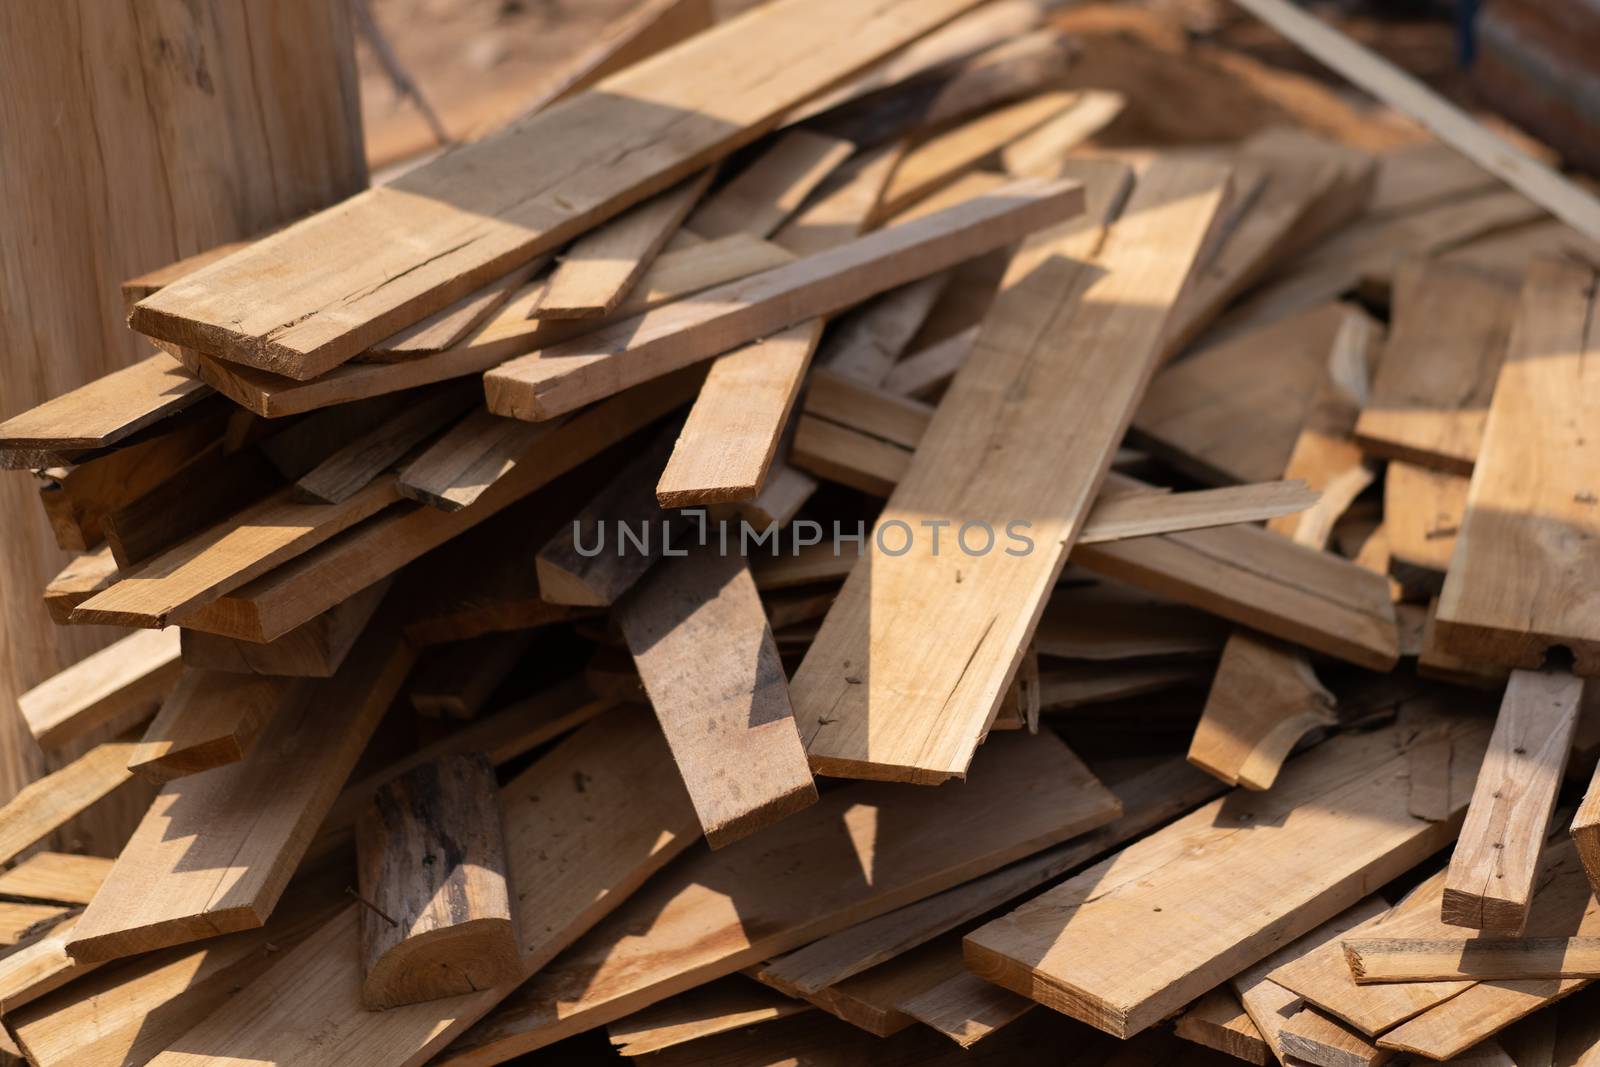 The wood was stacked on the floor.